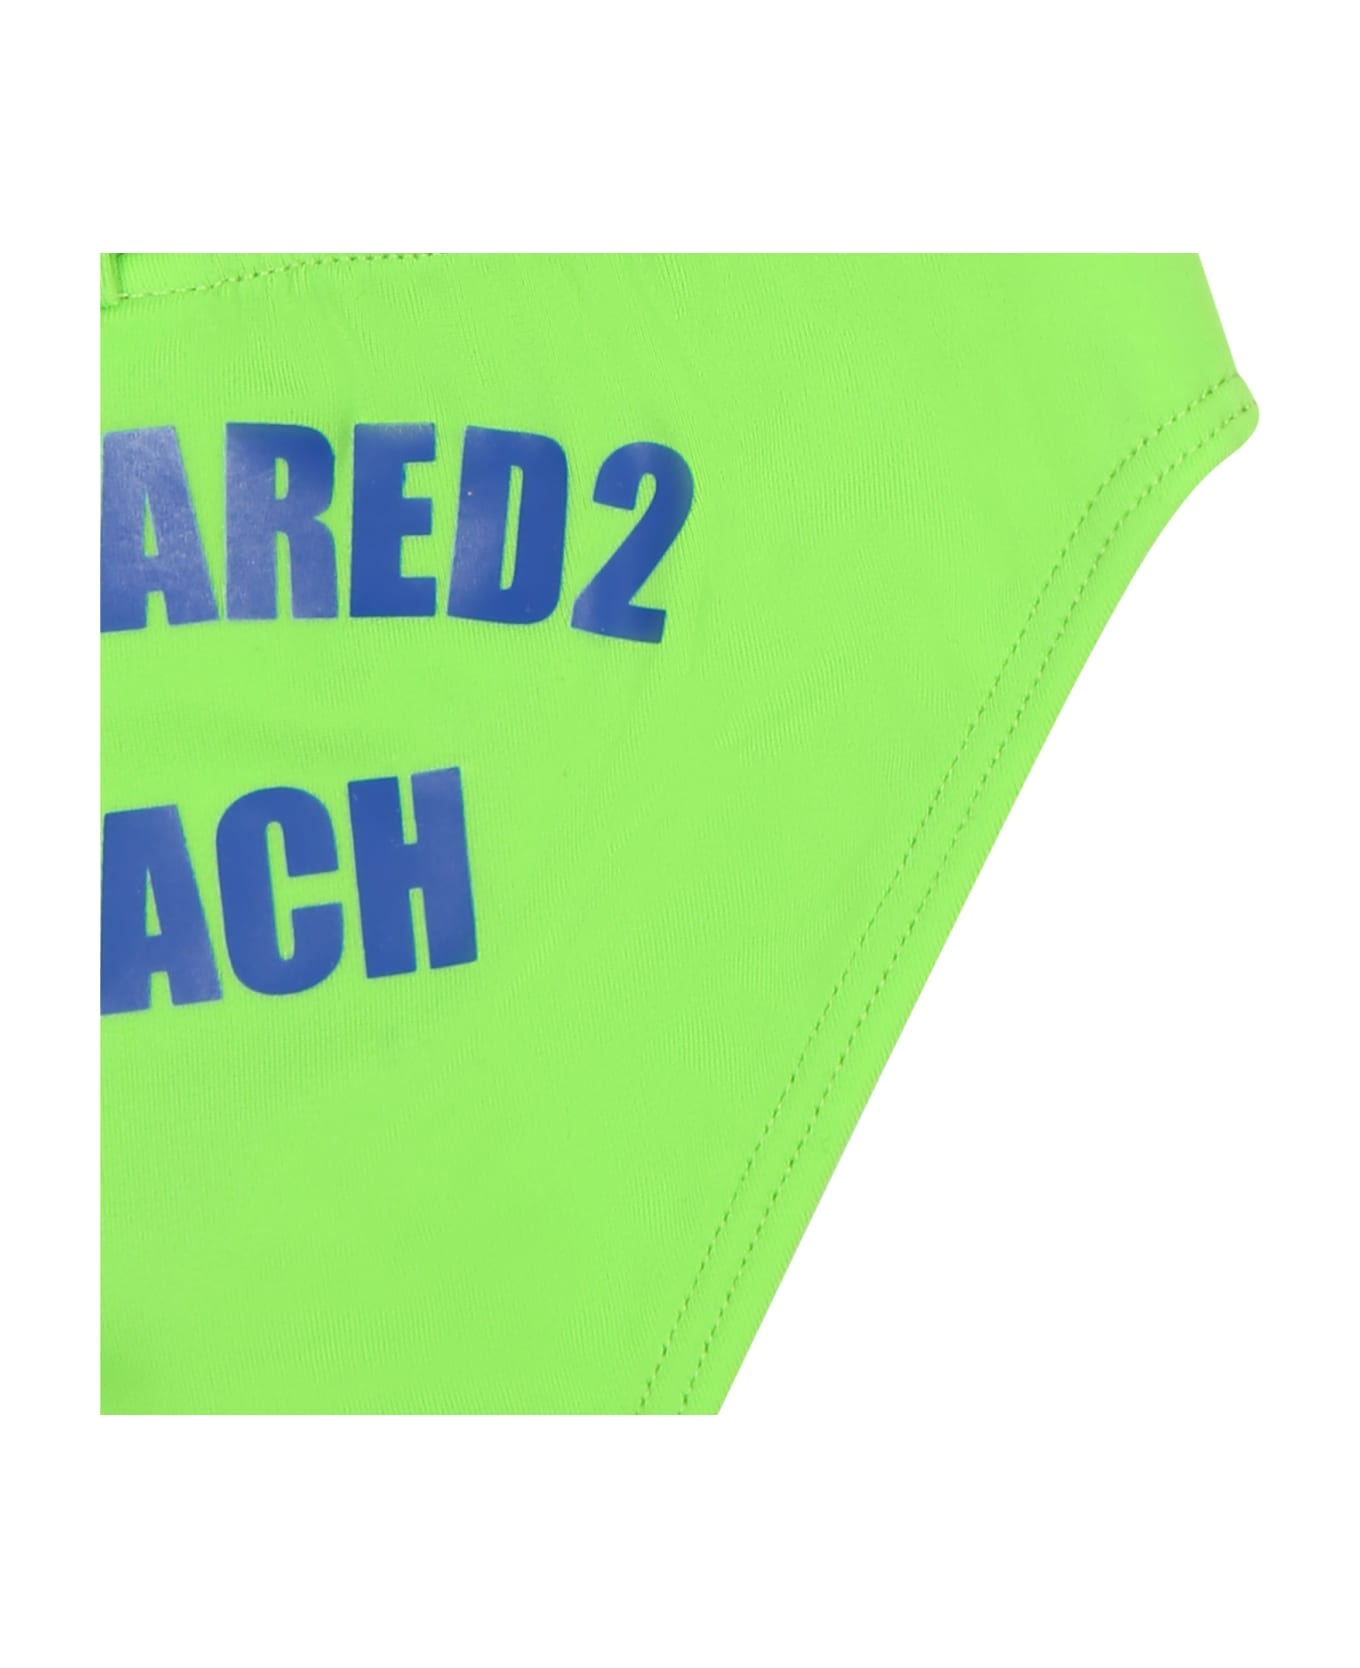 Dsquared2 Green Swim Briefs For Baby Boy With Logo - Green 水着